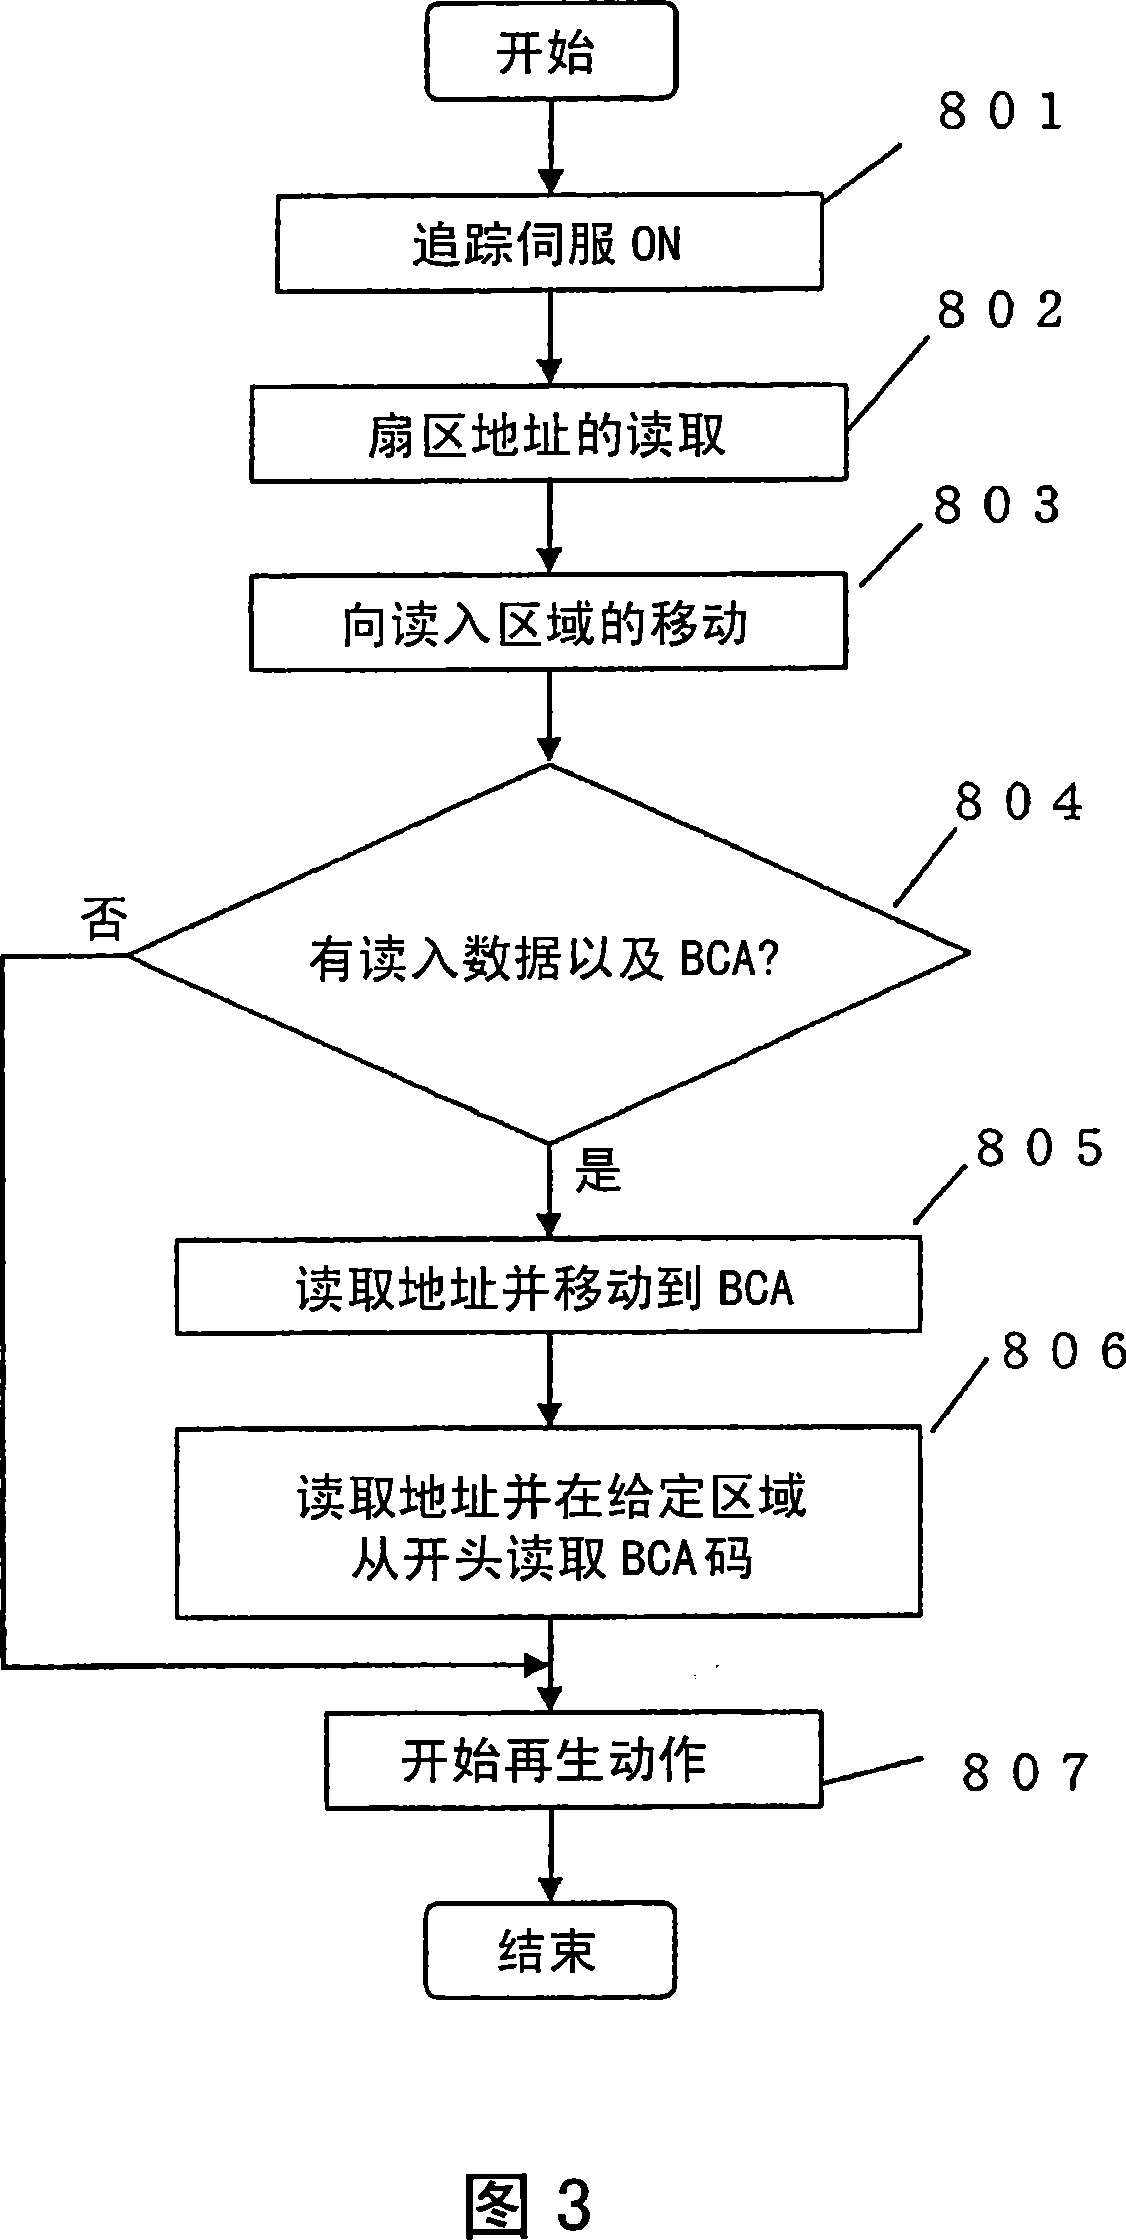 Optical disk reproducing device